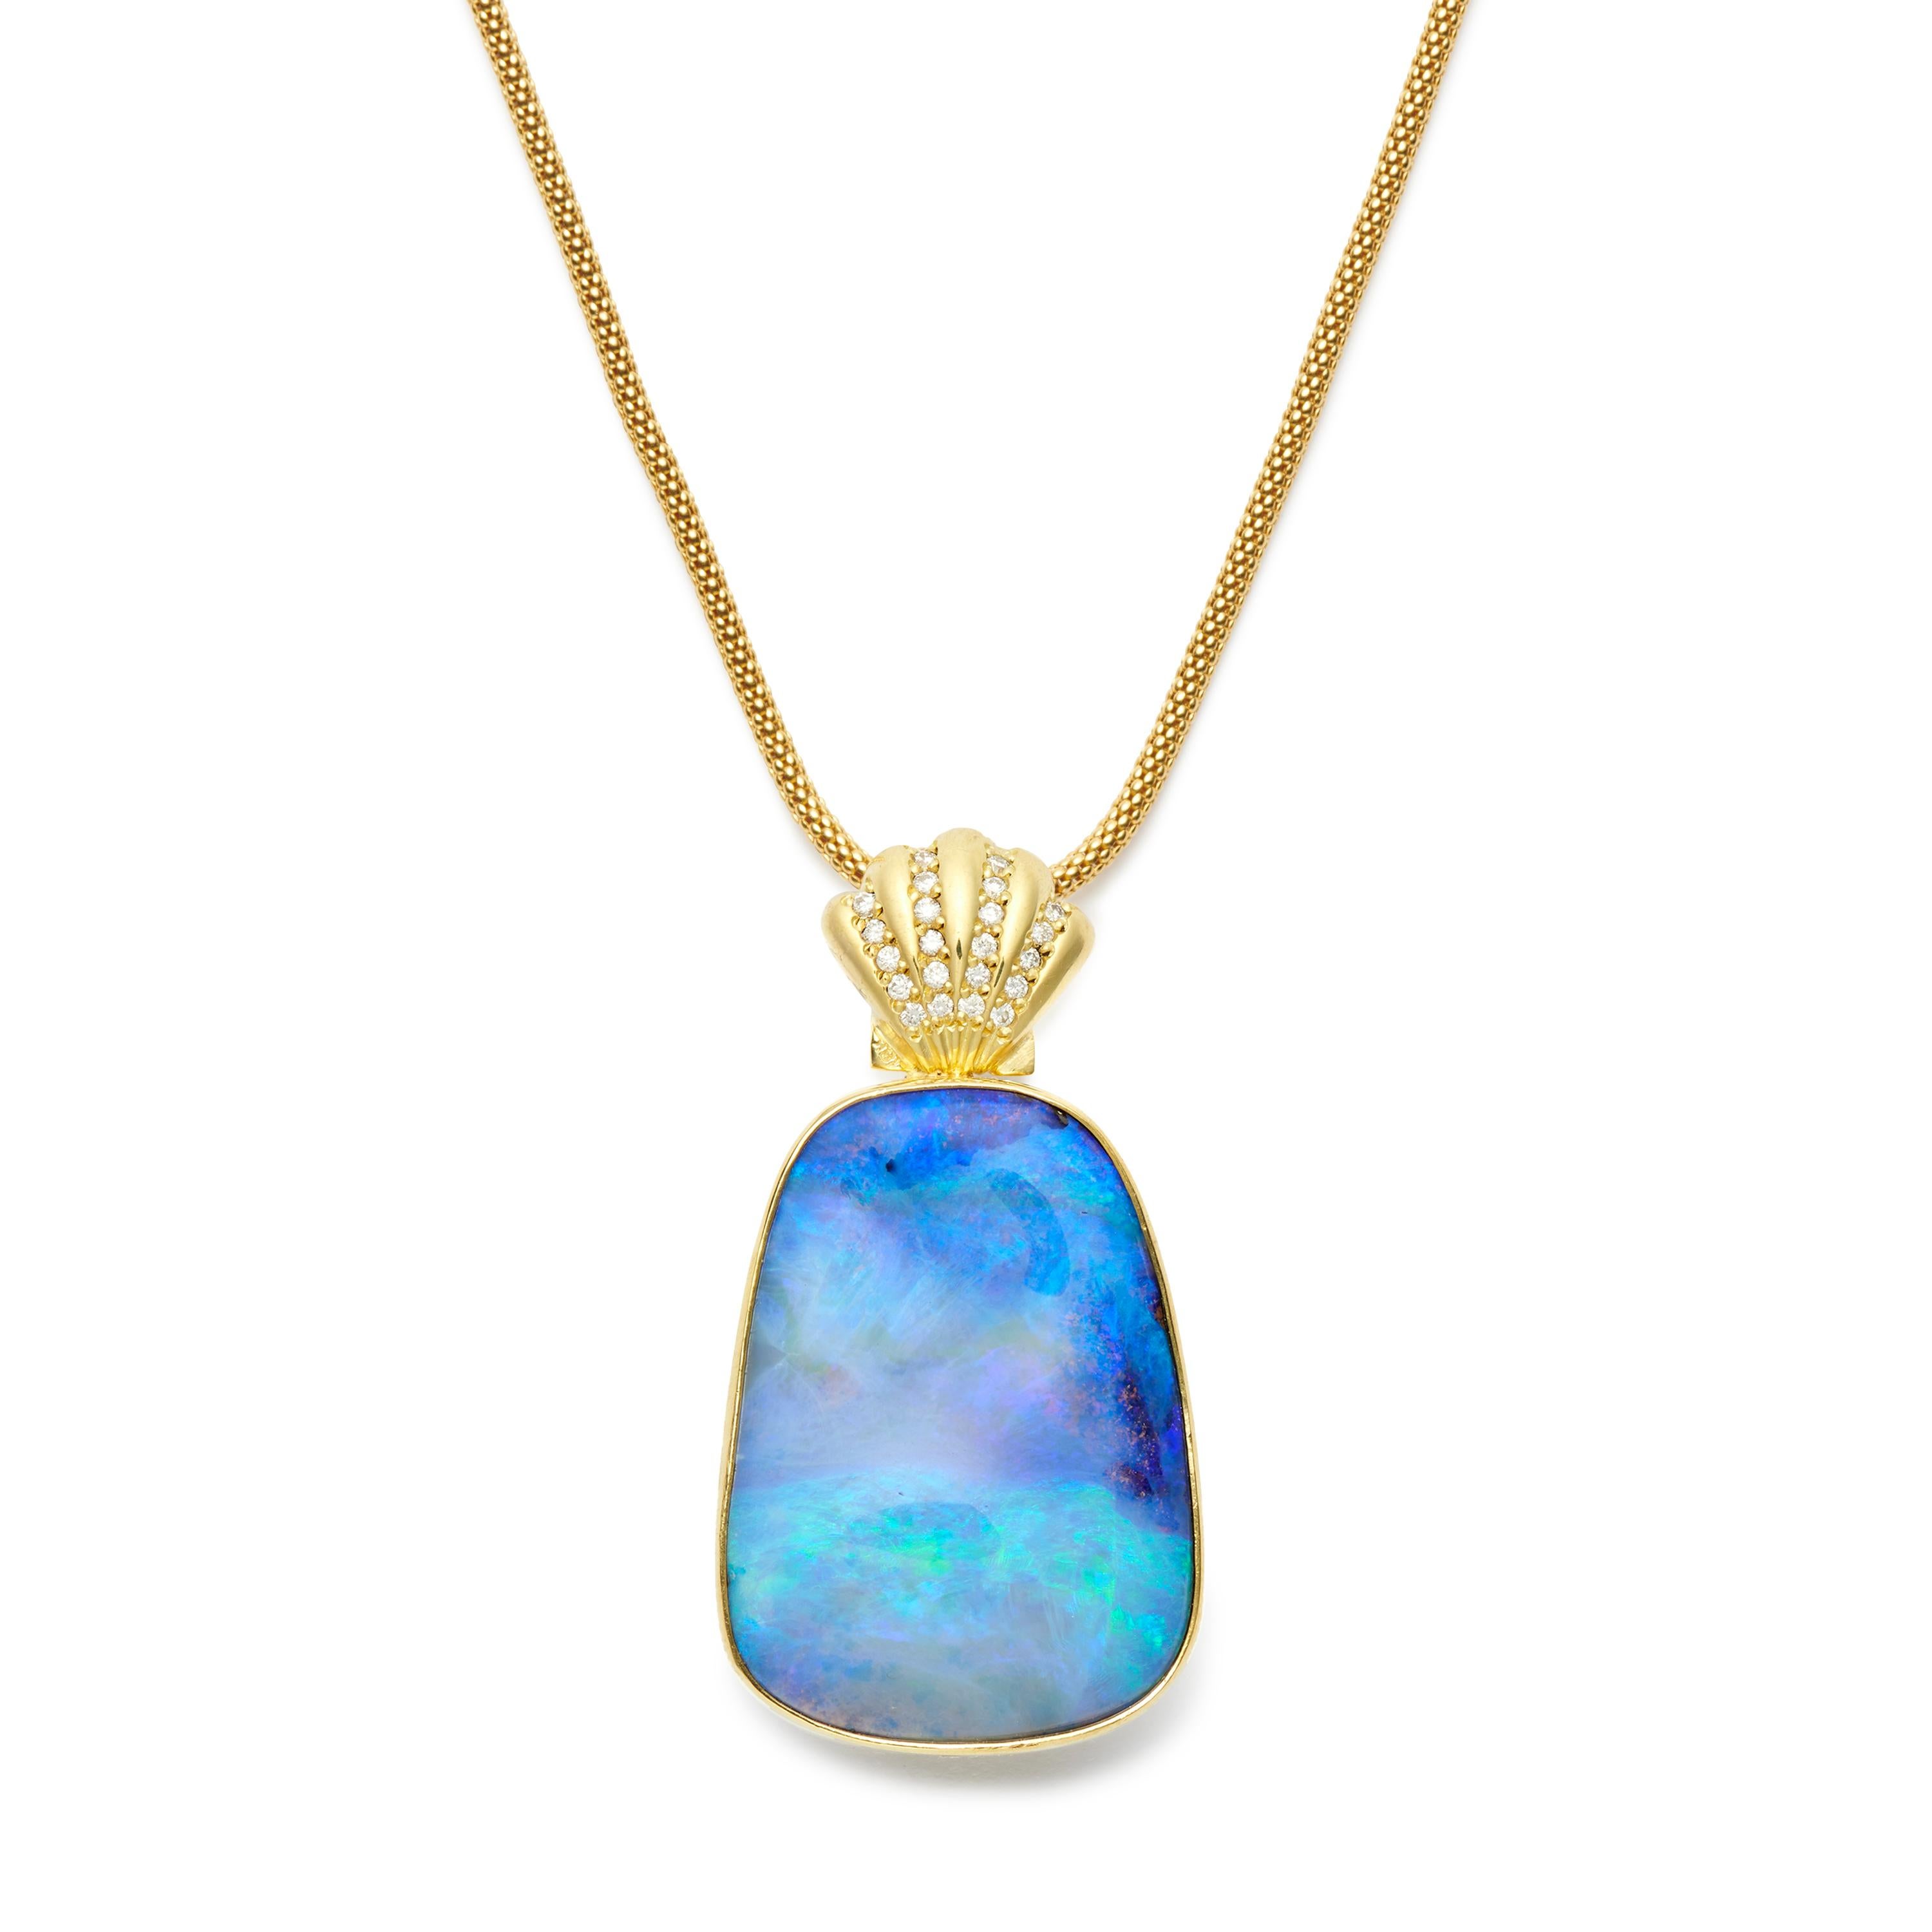 This beguiling Boulder Opal Pendant, with its intense blue hues, mesmerizes, like the colors of the ocean, the moment you look at it. A large and lovely piece that hangs from an 18 karat Gold and Diamond Scallop Shell bale and can be displayed from